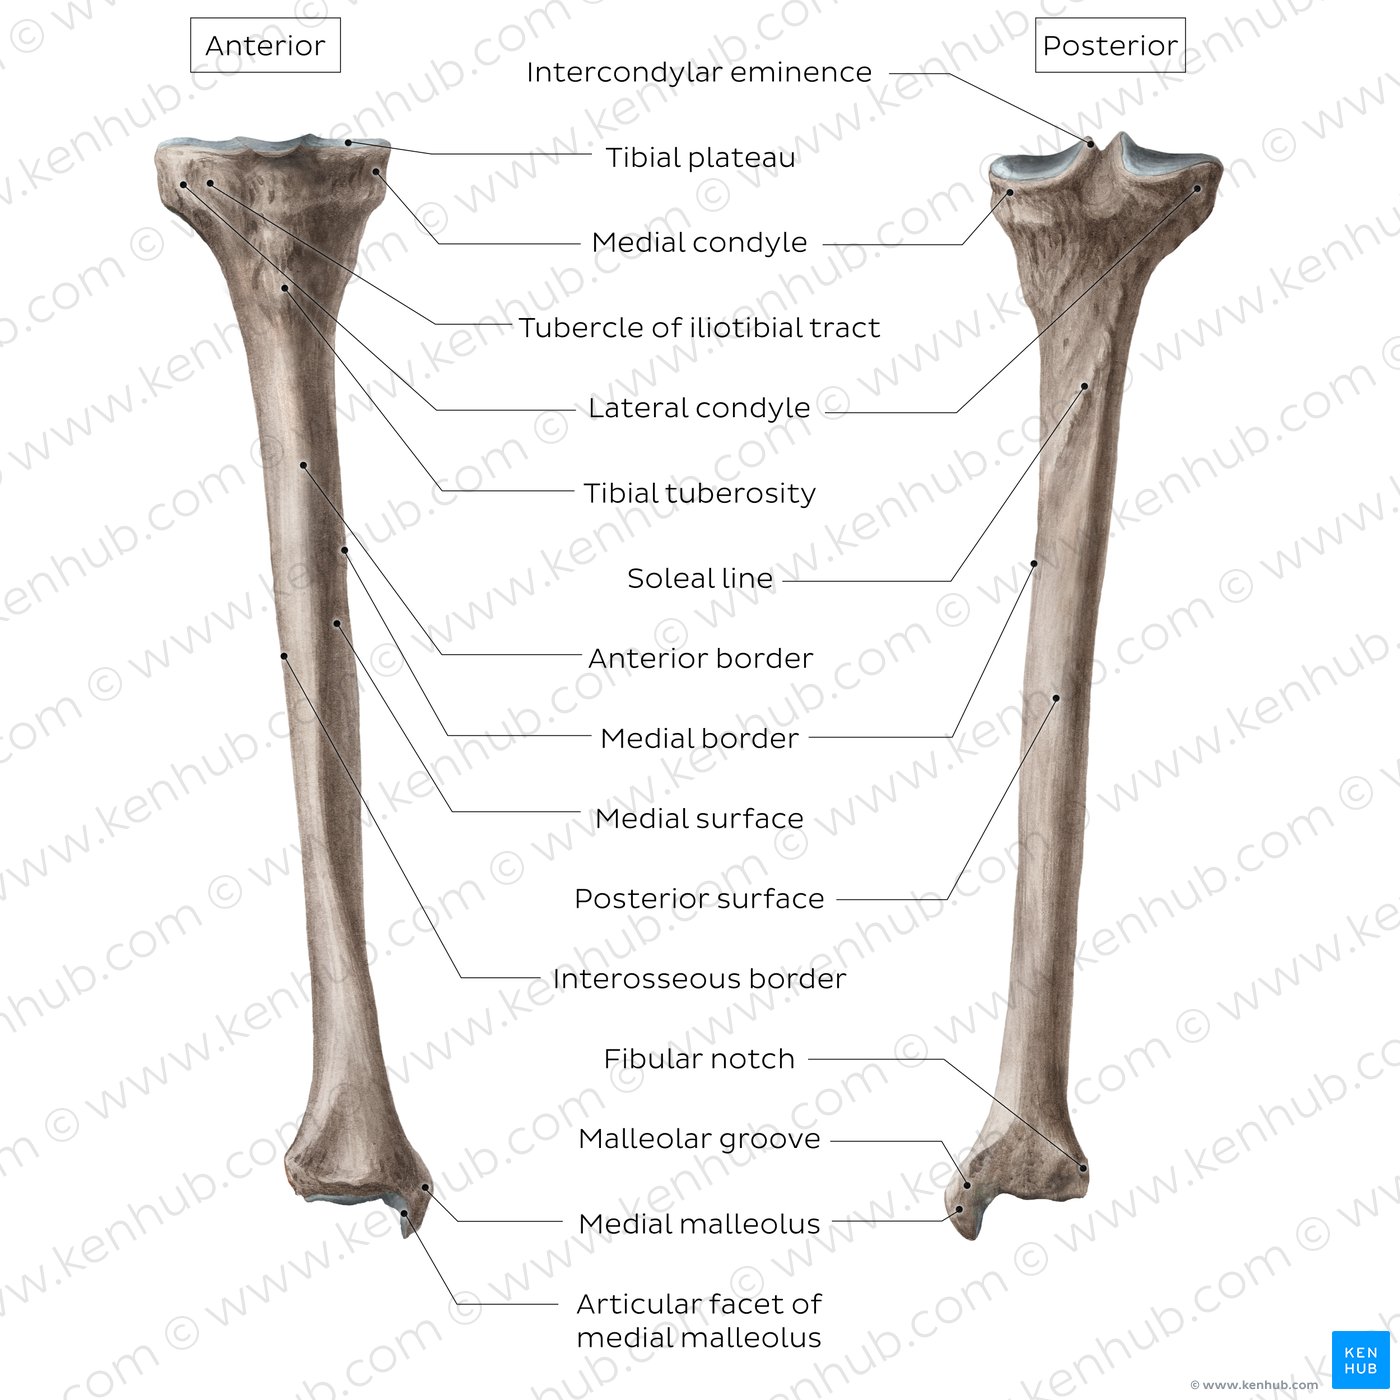 Parts, surfaces and landmarks of the tibia